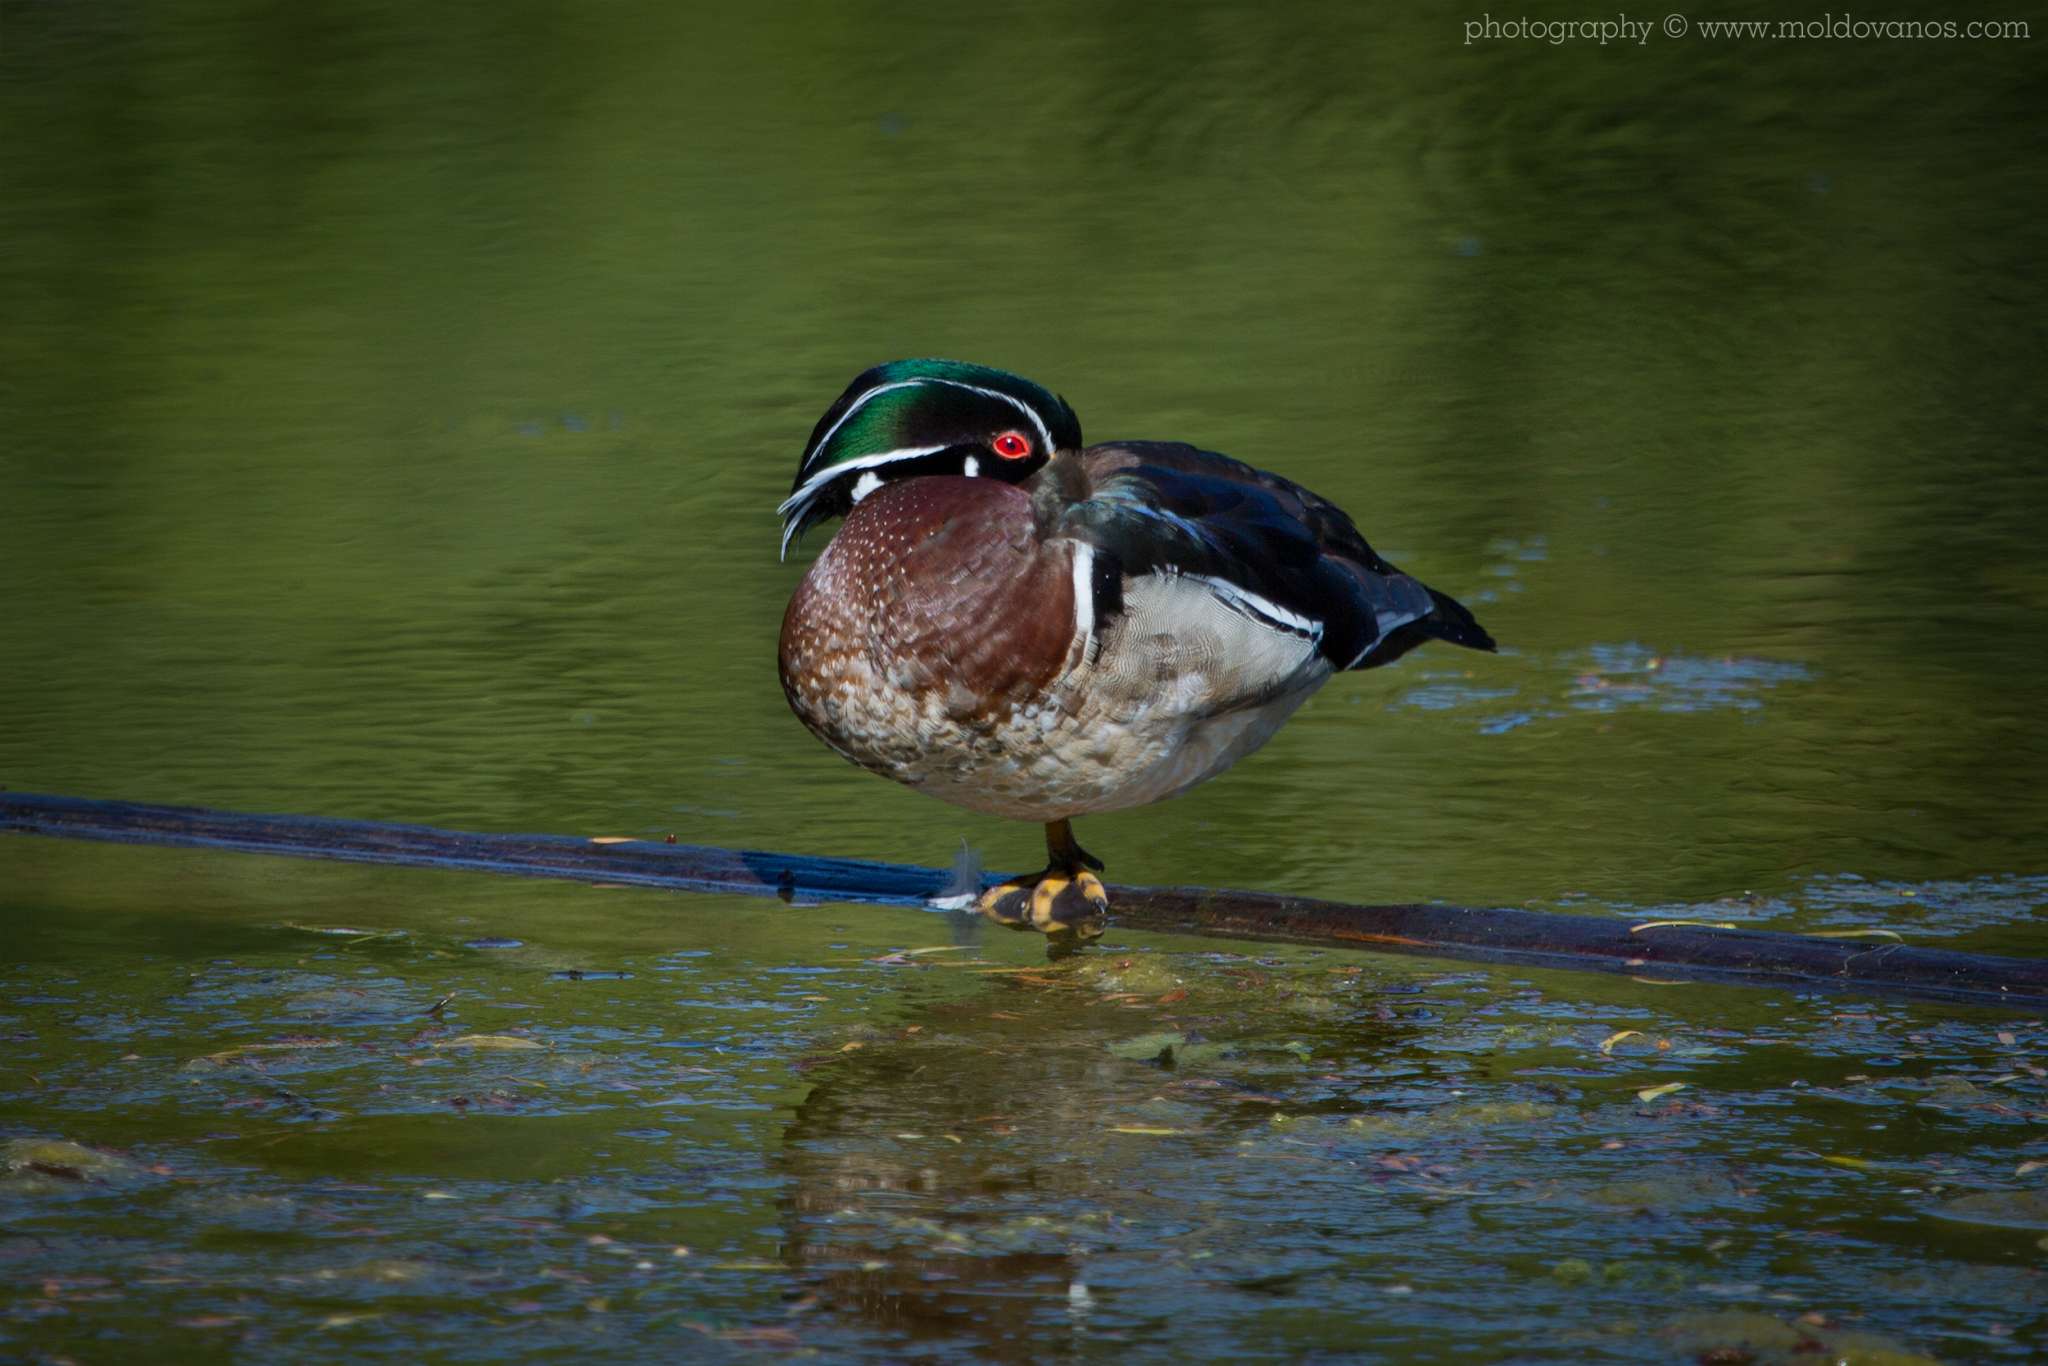 Male Wood Duck - Nature Photography - Photography by Paul Moldovanos © moldovanos.com